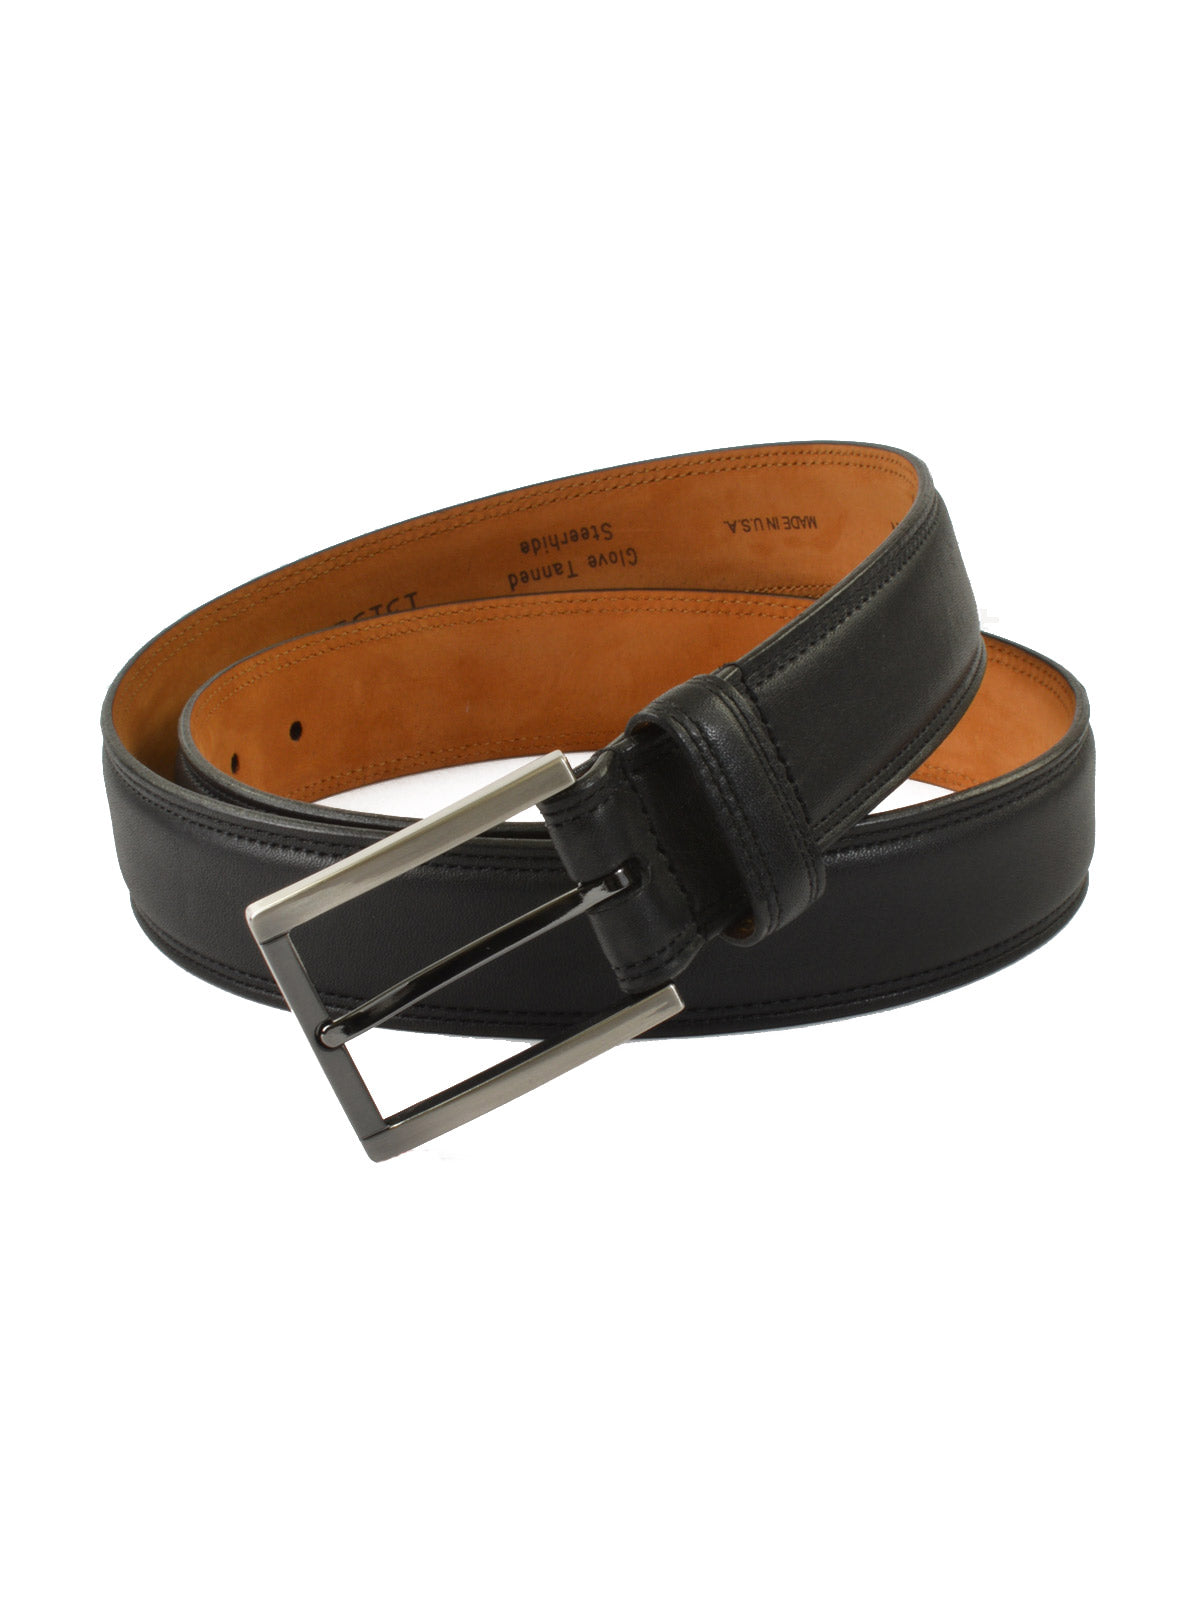 Lejon Glove Tanned Leather Dignitary Belts in Black - Big Man Sizes